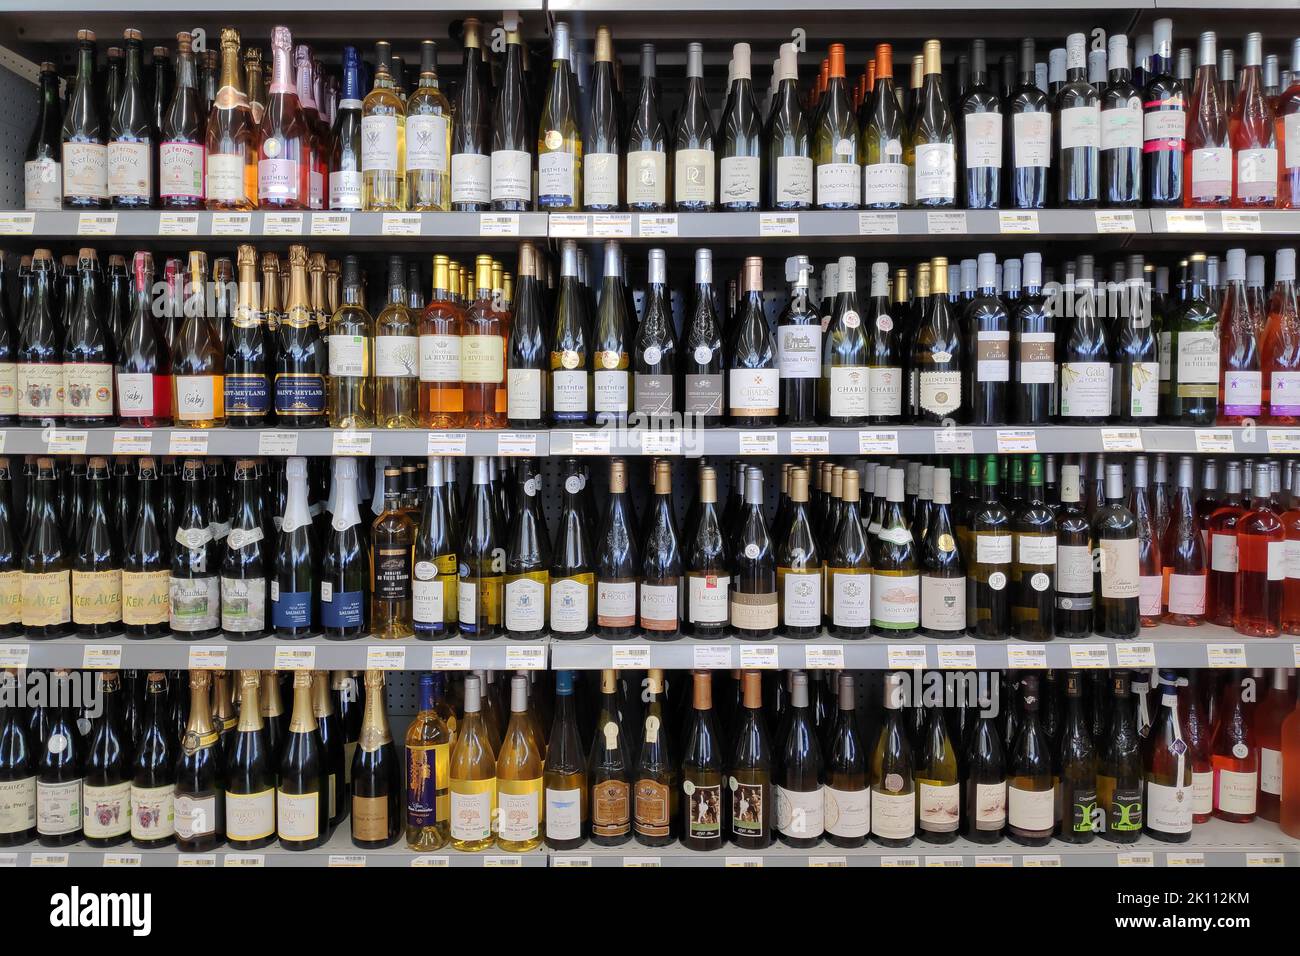 Morlaix, France - March 30 2022: Shelves of a store filled with French wines. Stock Photo